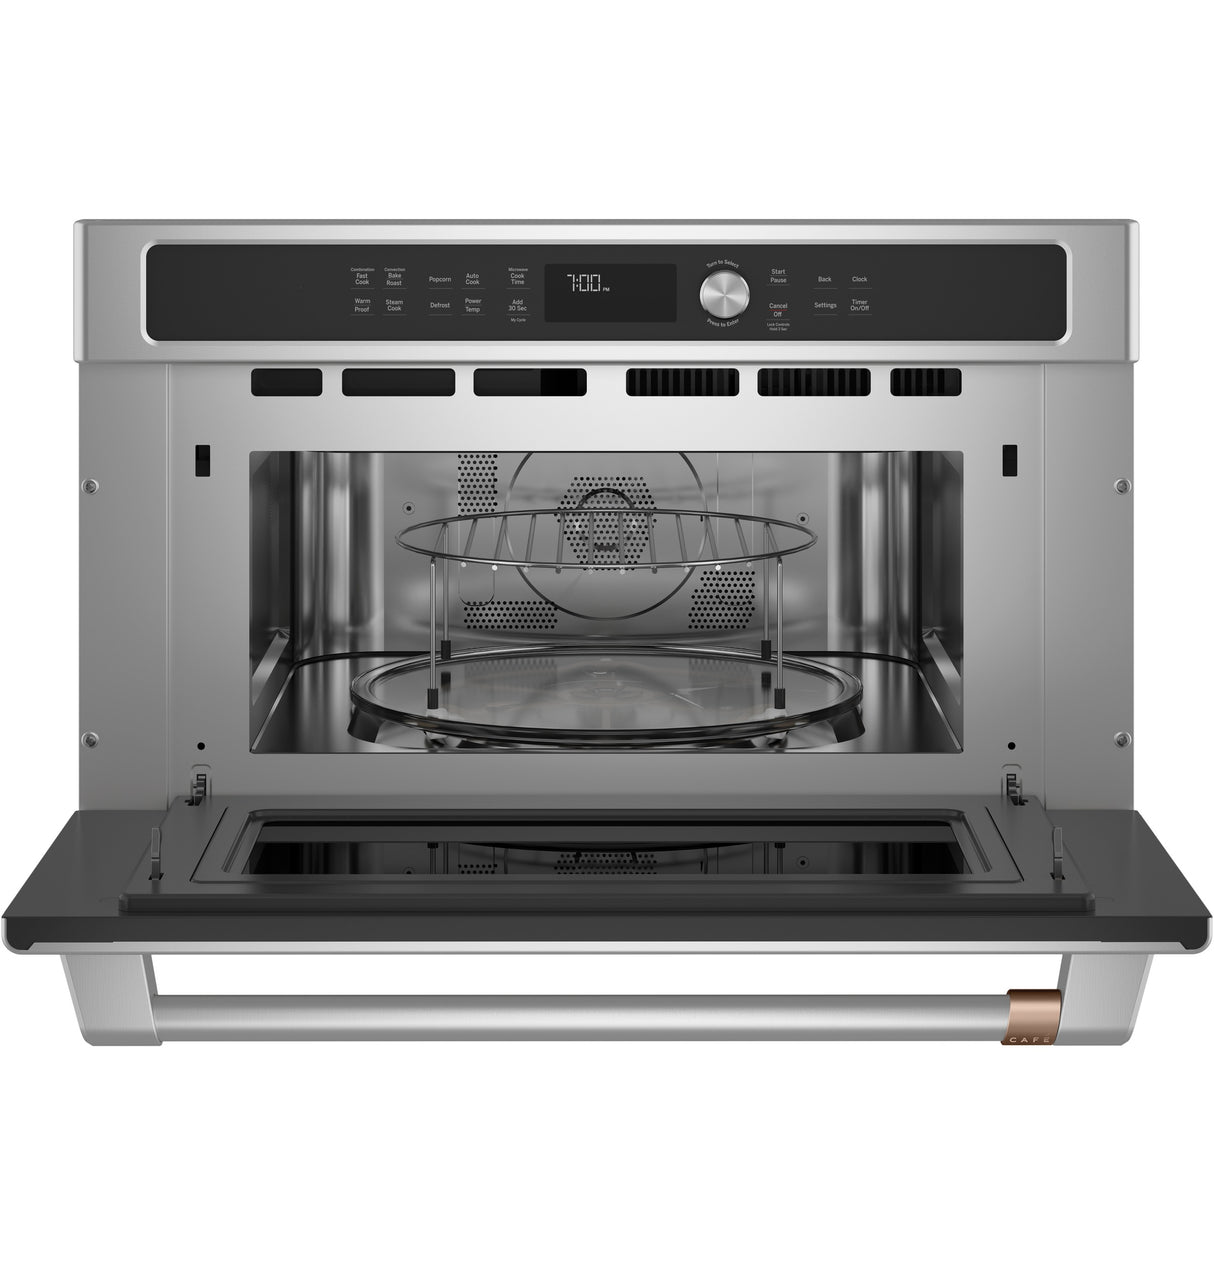 Caf(eback)(TM) Built-In Microwave/Convection Oven - (CWB713P2NS1)